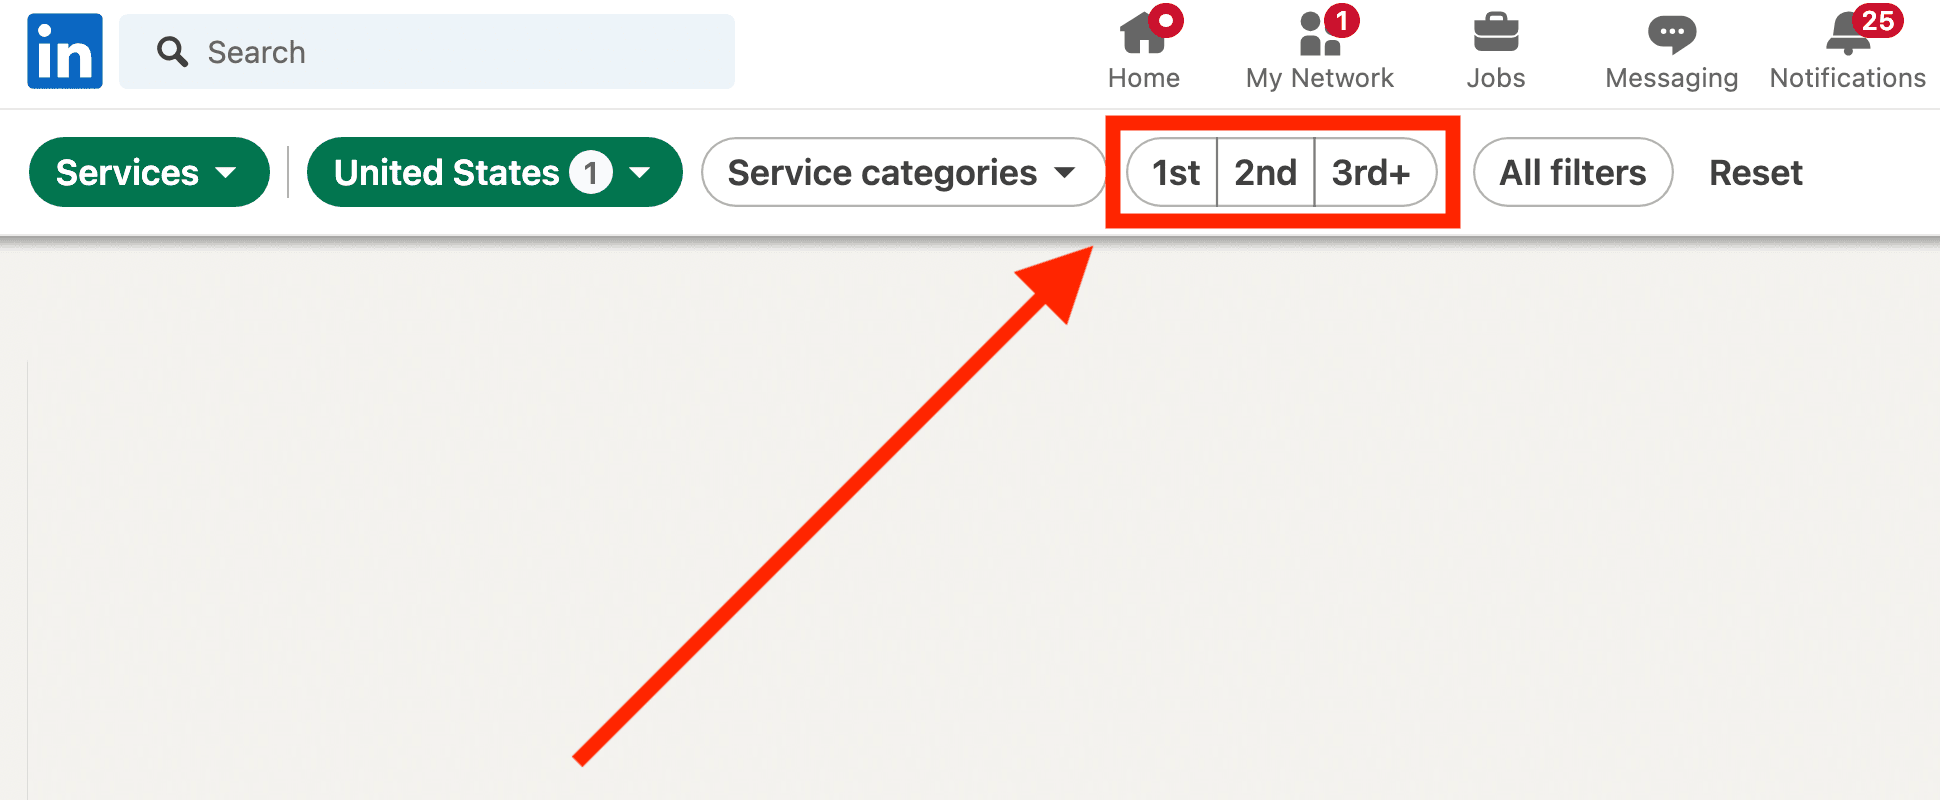 linkedin services search connections filter - image67.png